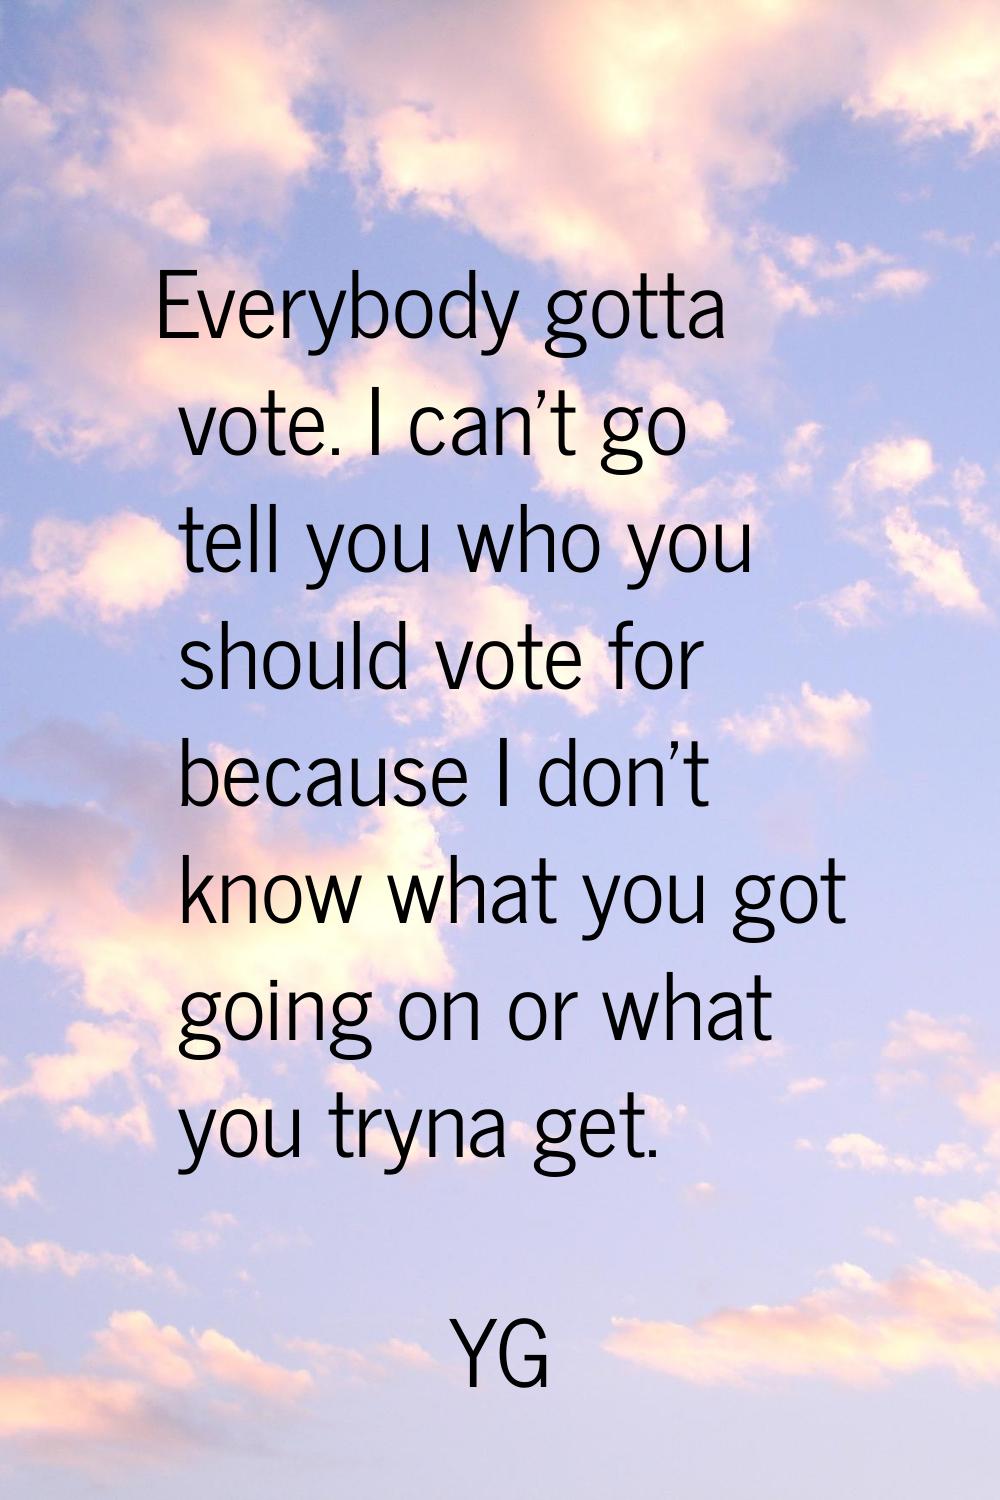 Everybody gotta vote. I can't go tell you who you should vote for because I don't know what you got